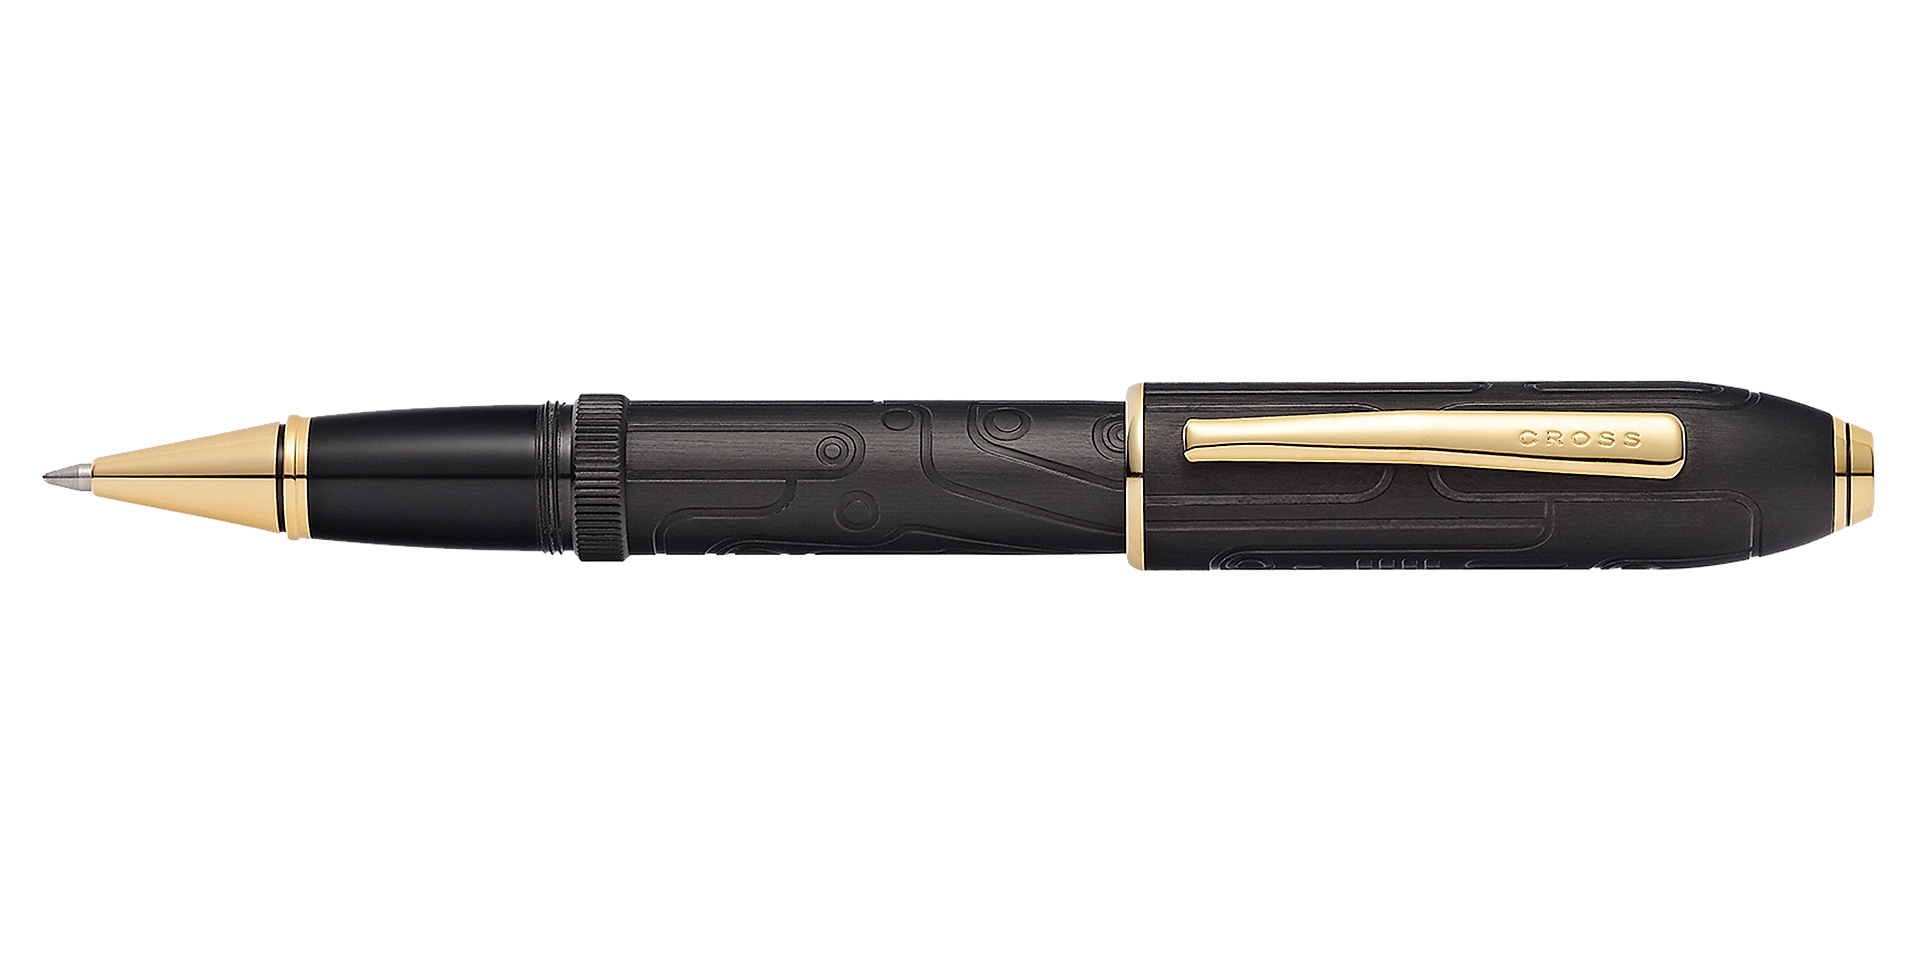  Peerless Fonderie 47 Collector’s Edition Rollerball Pen